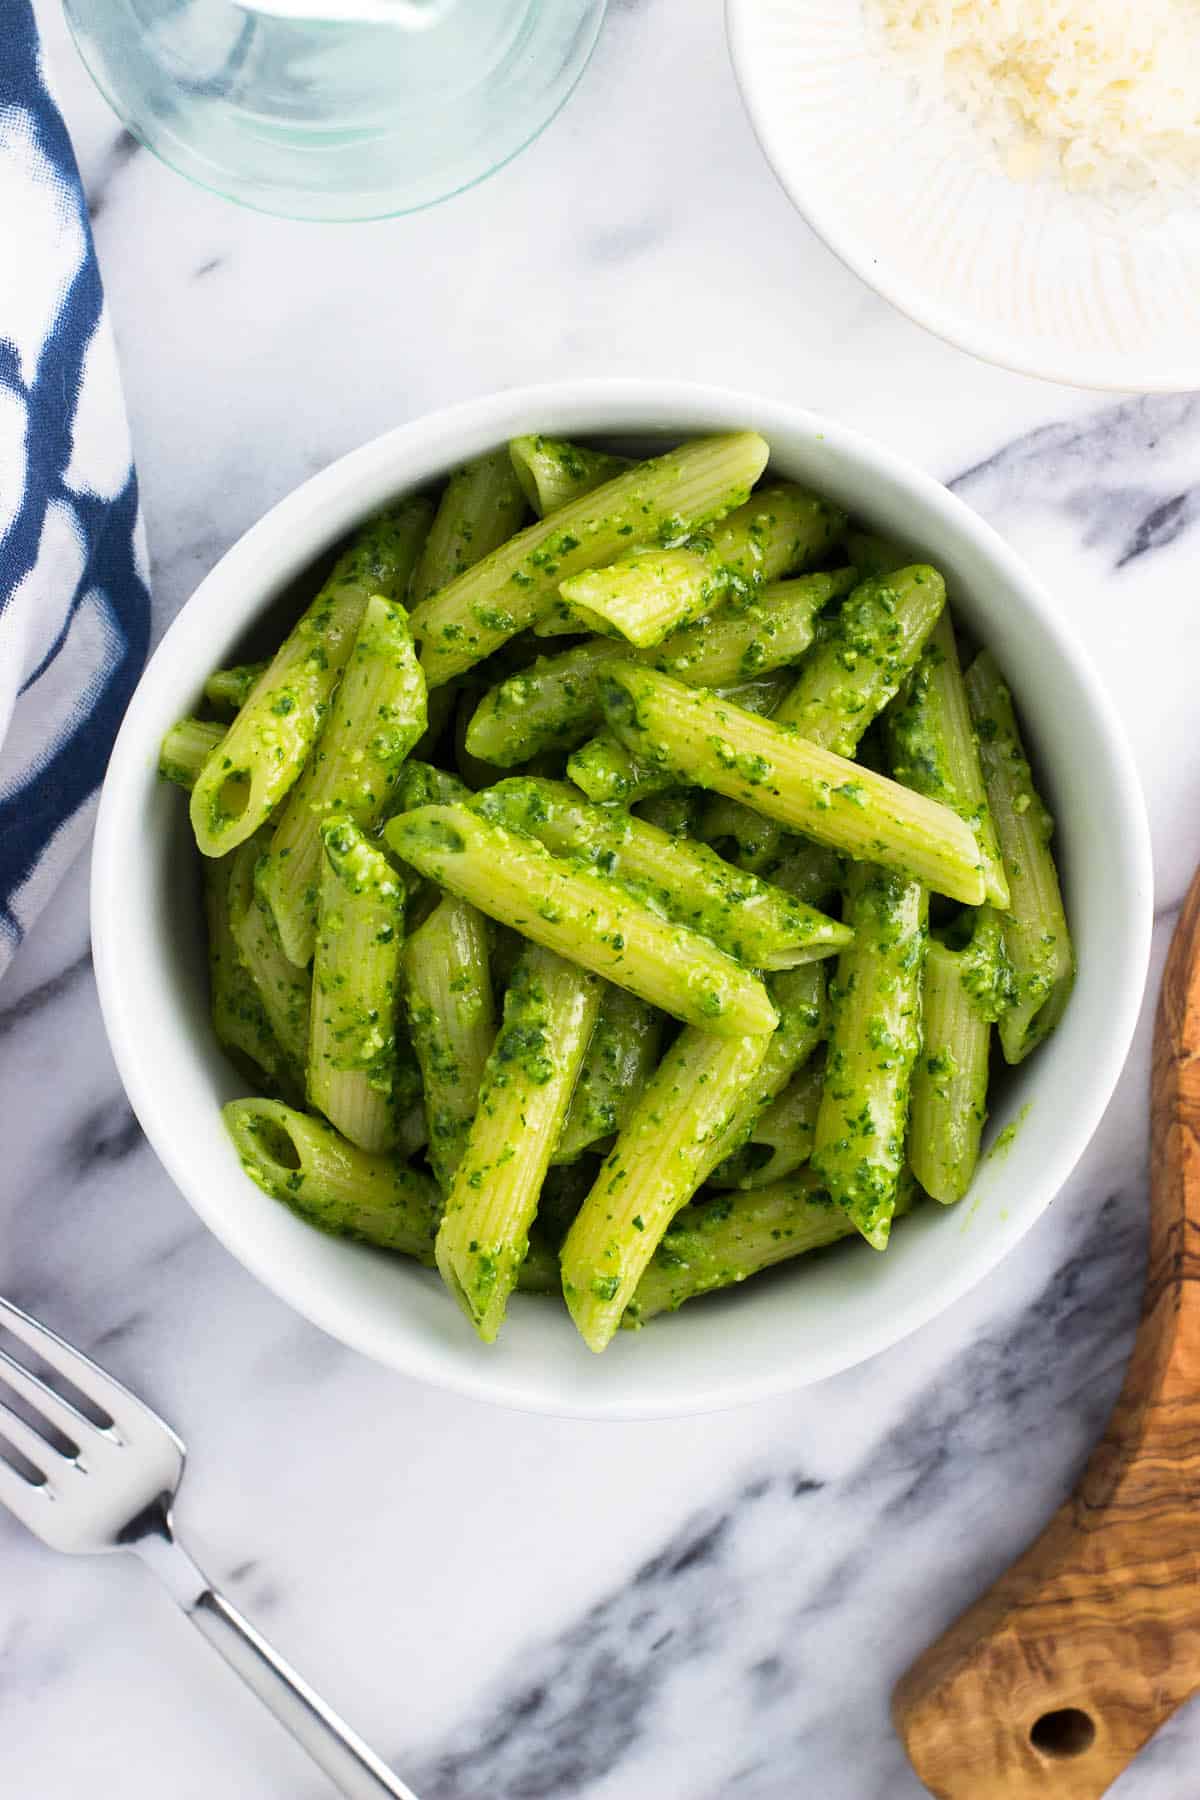 Spinach pesto sauce on penne pasta in a bowl.